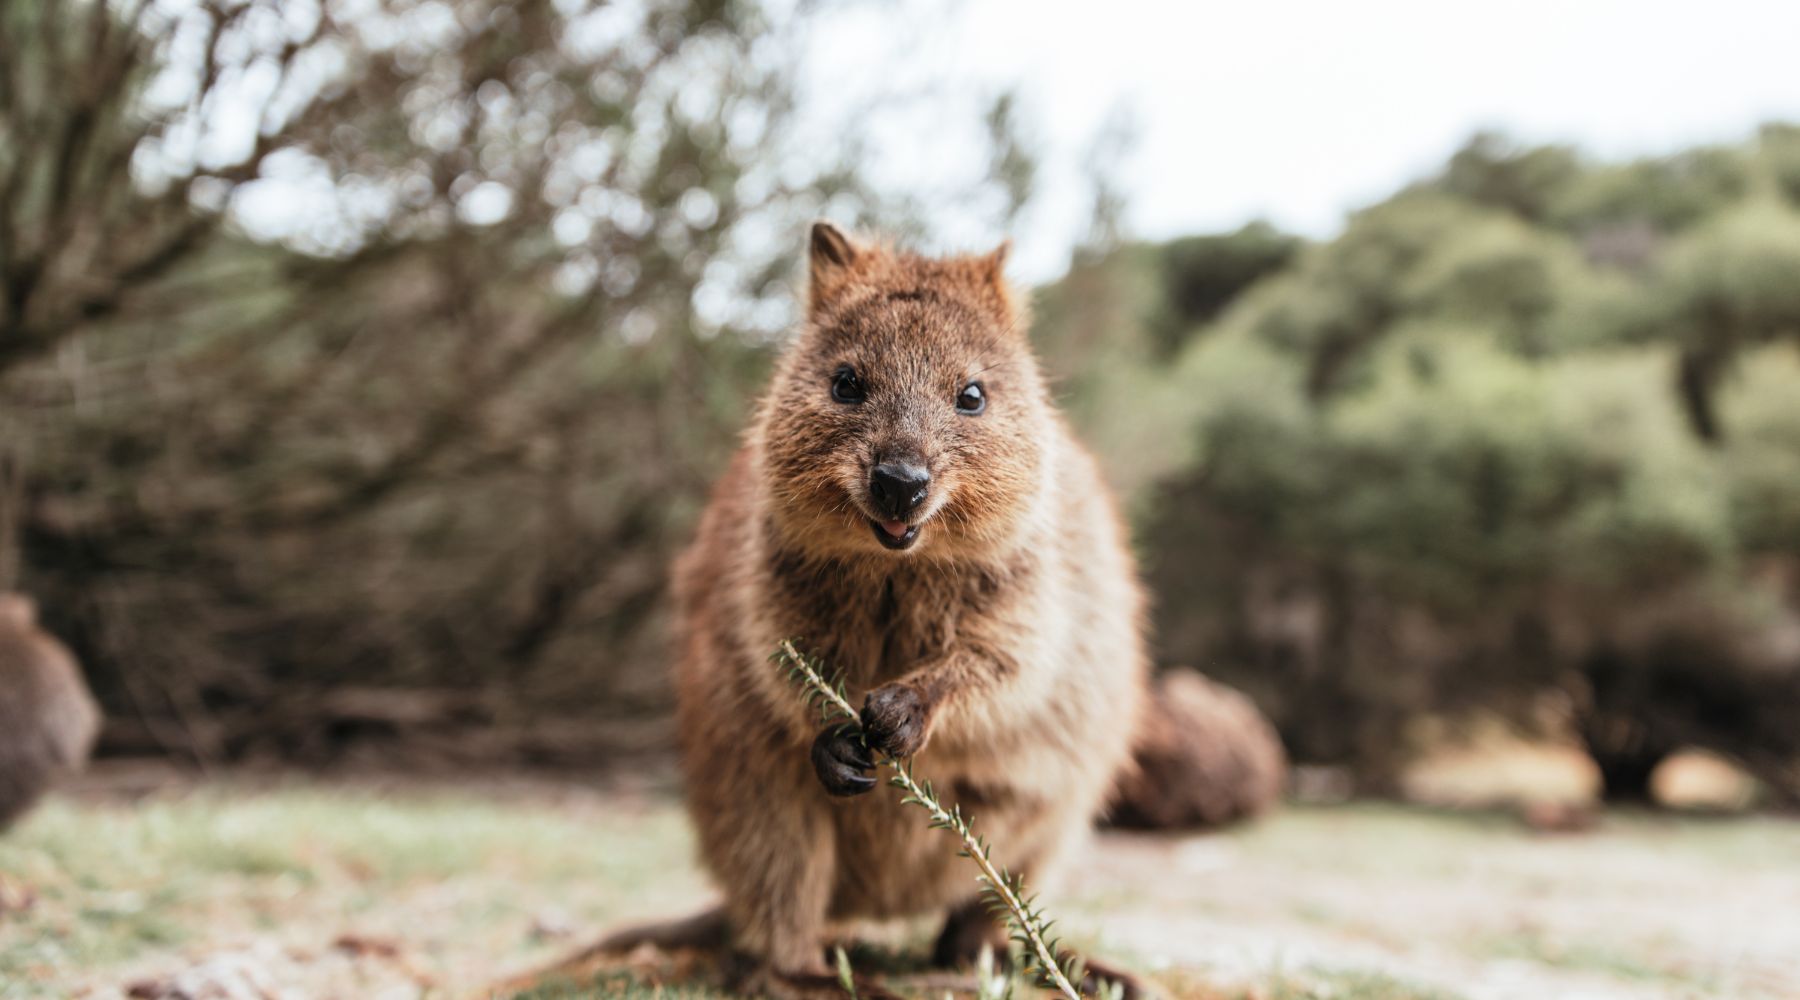 Quokka fun facts: the happiest animal in the world